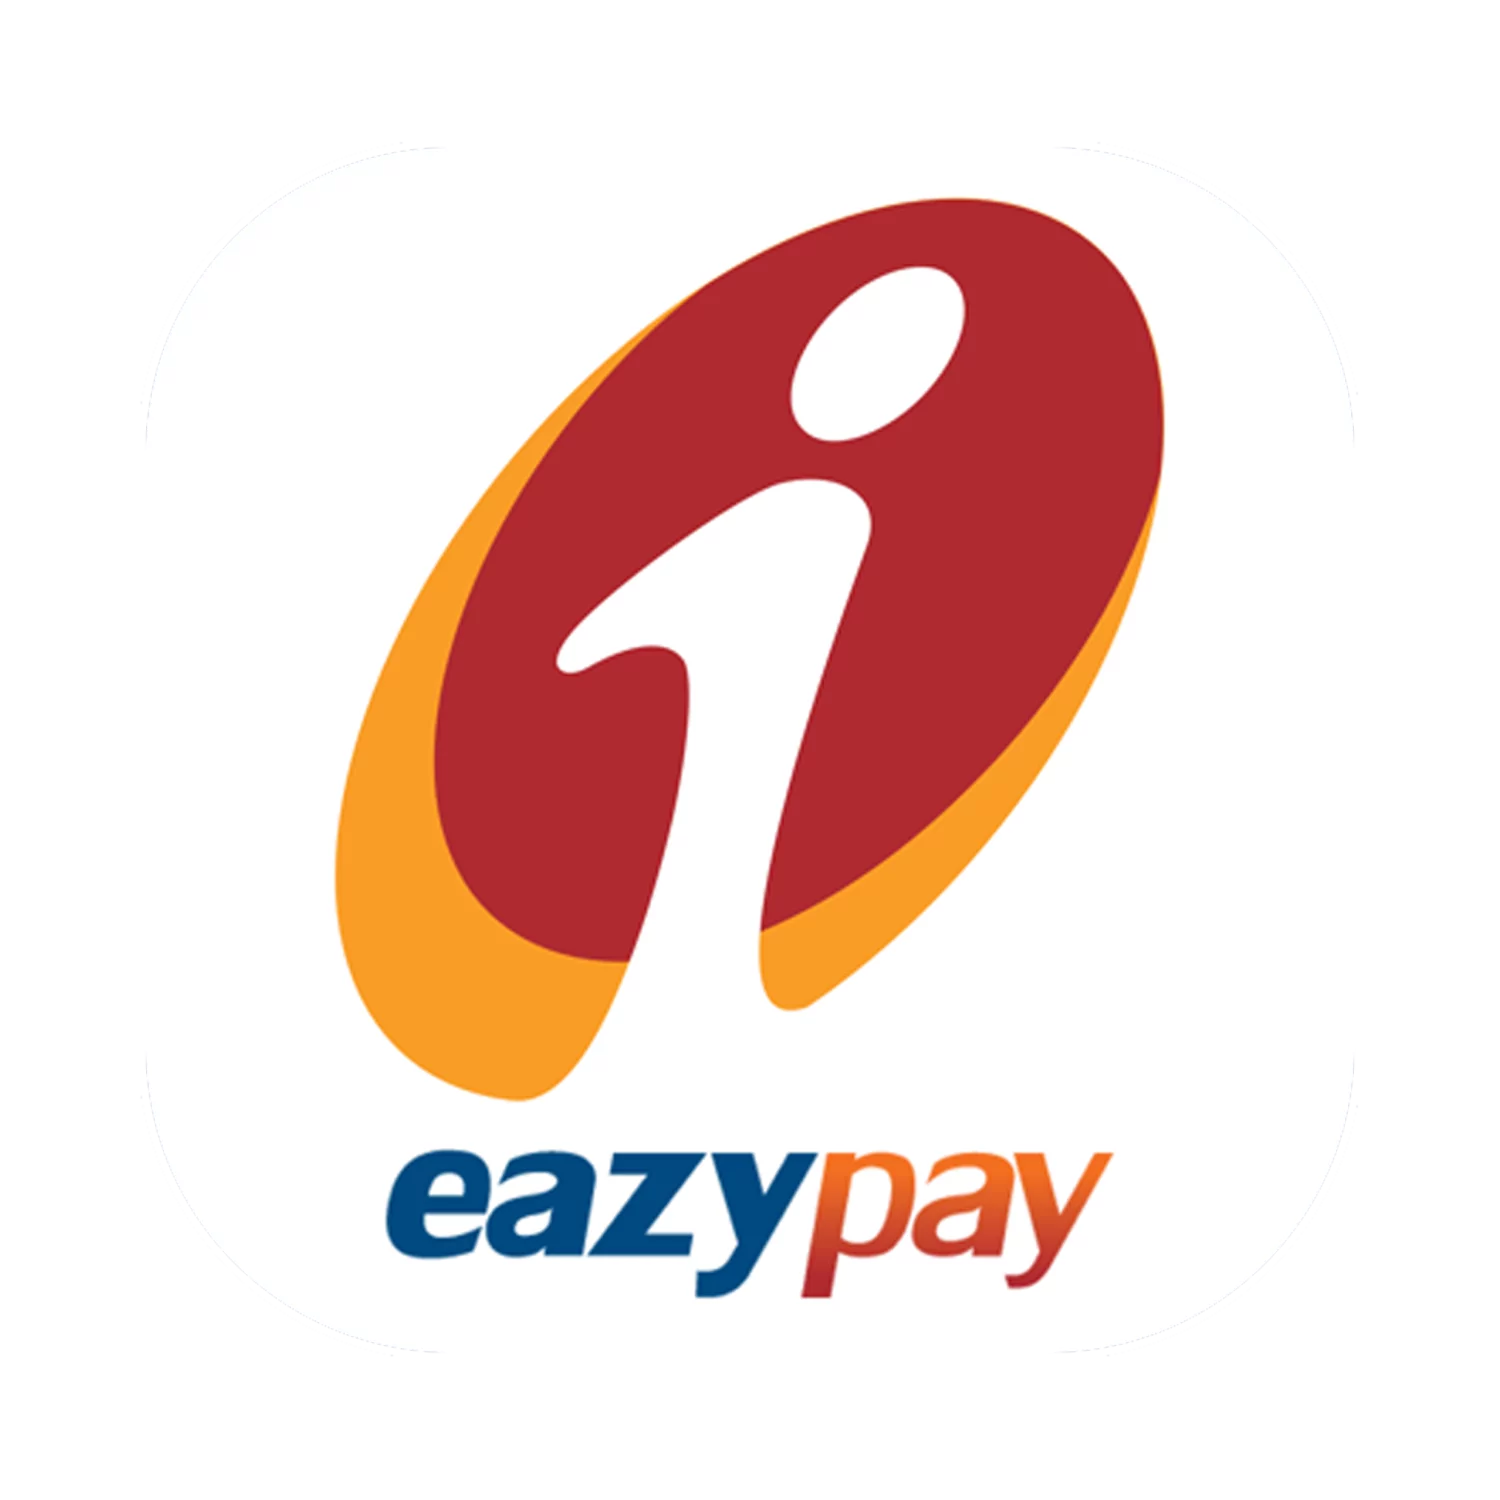 Learn how to use Eazypay system for transferring money.